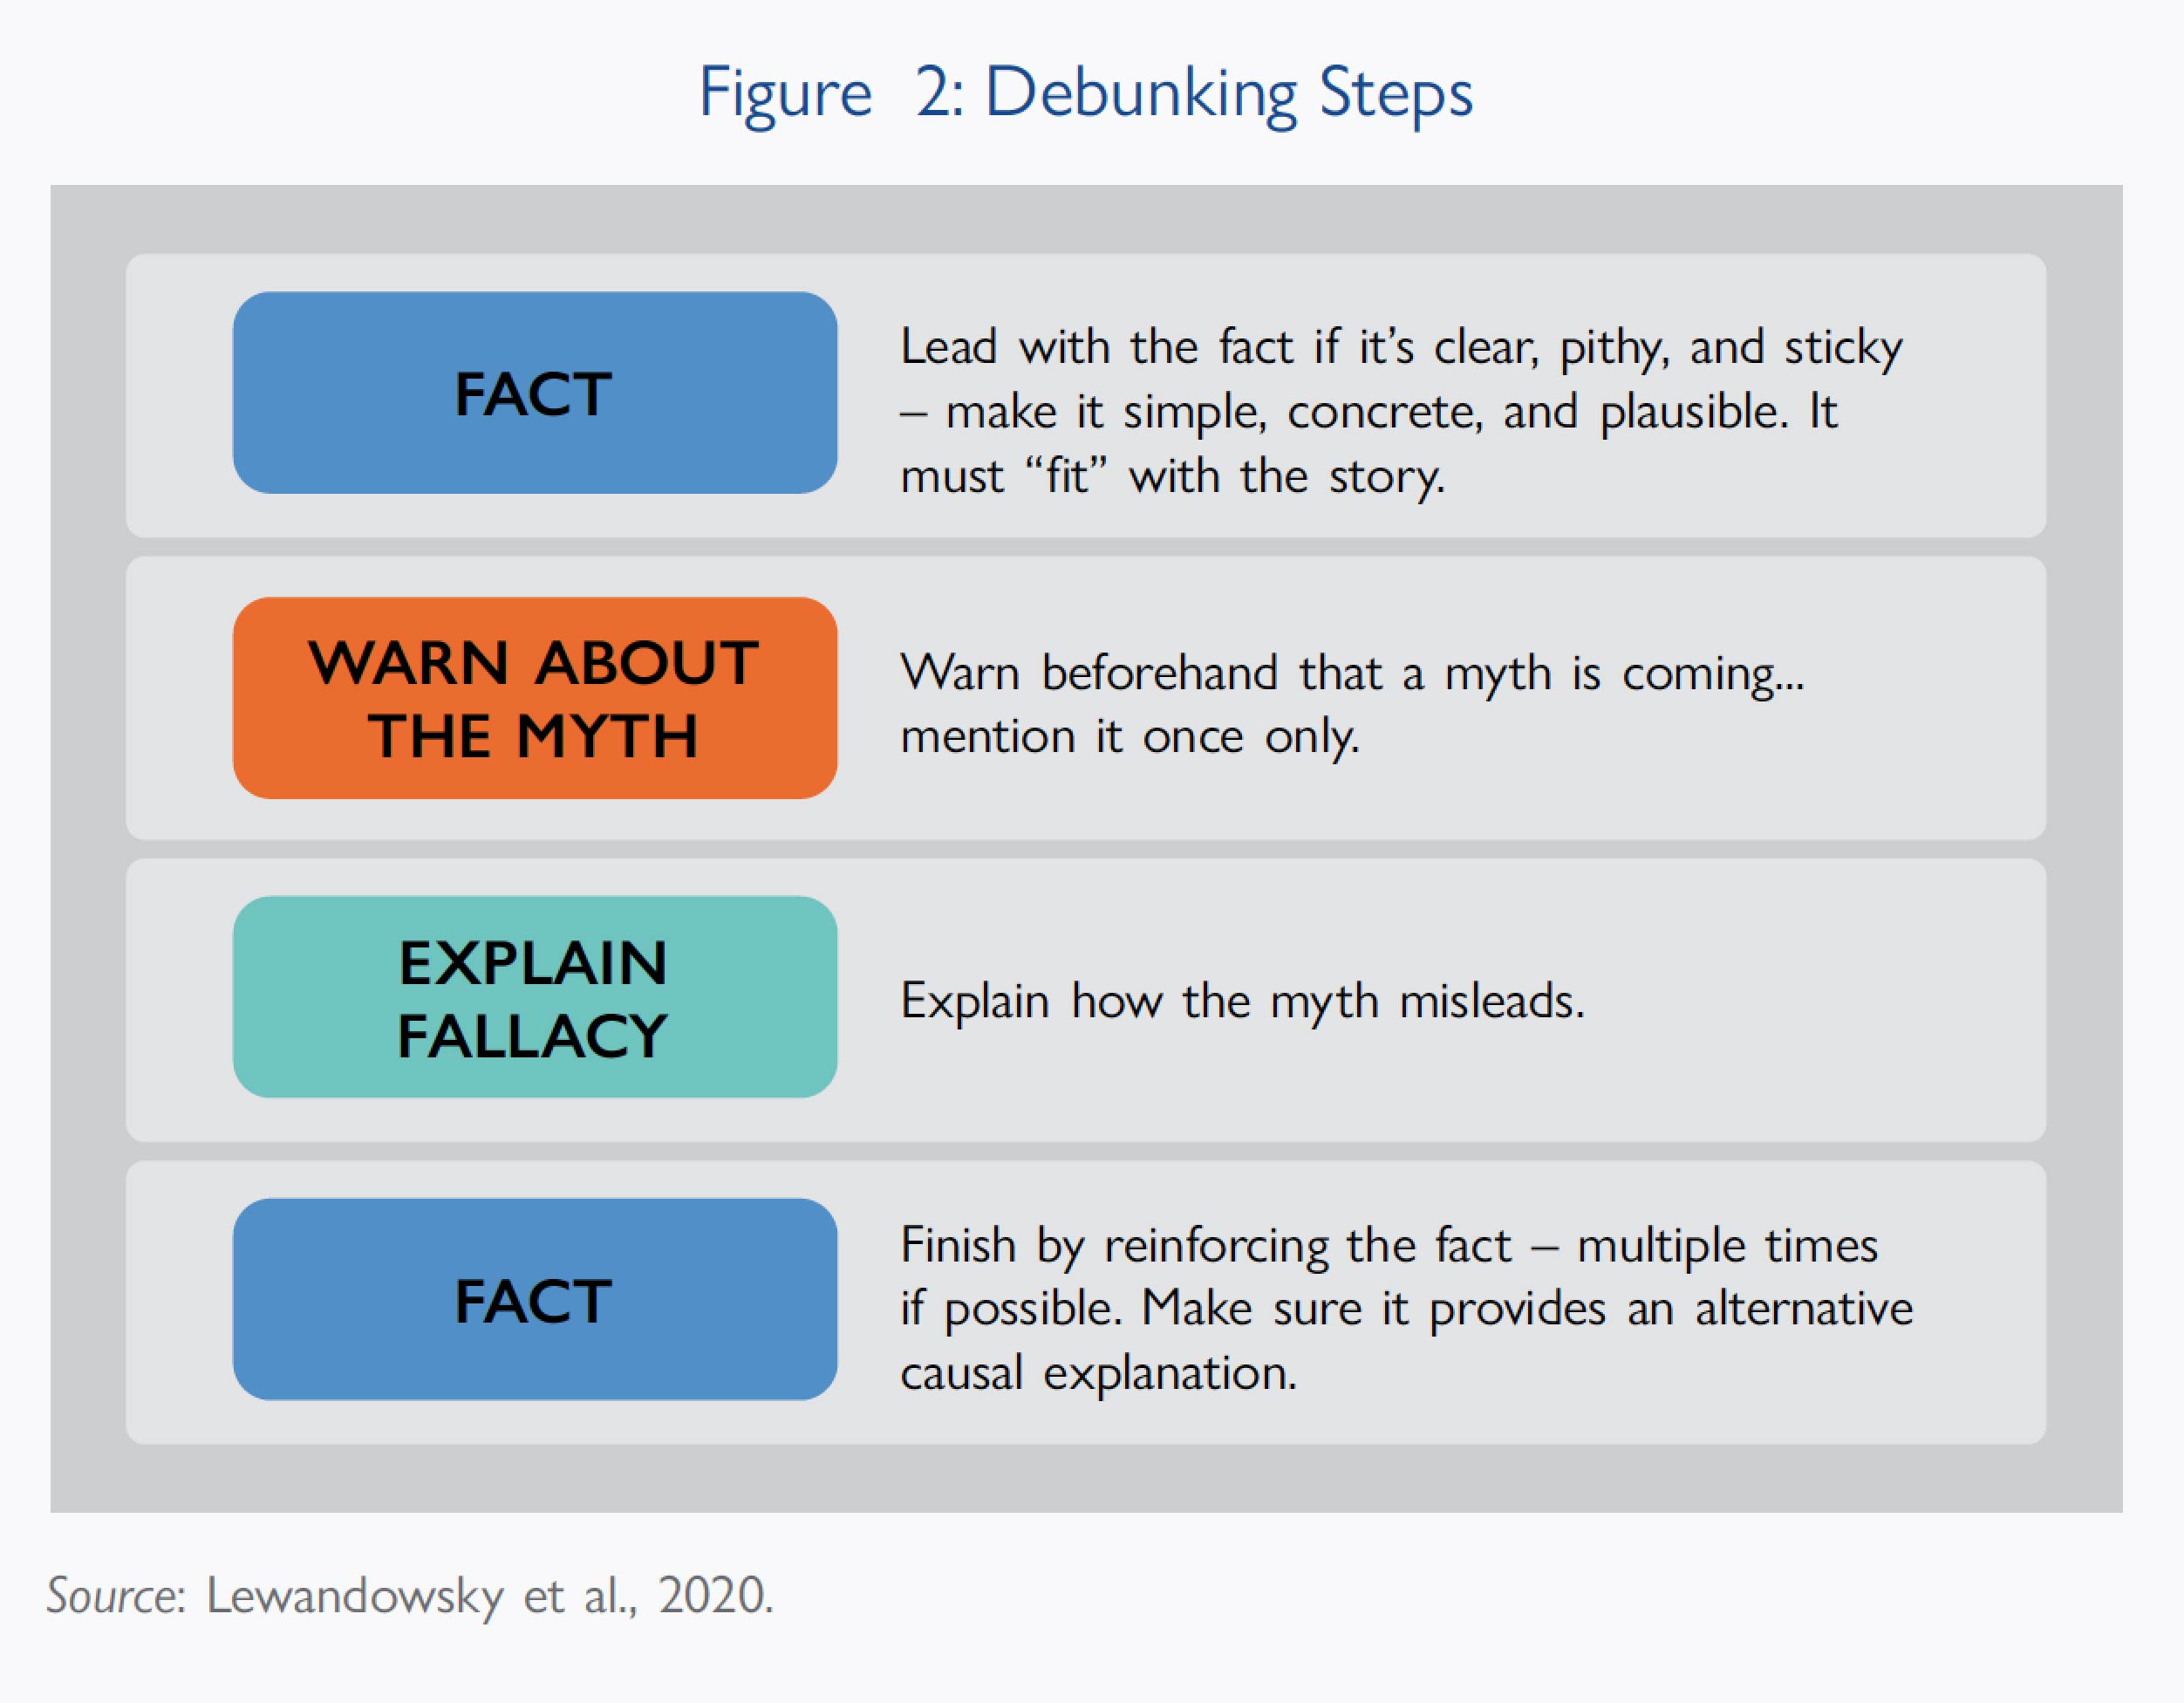 The online disinformation process